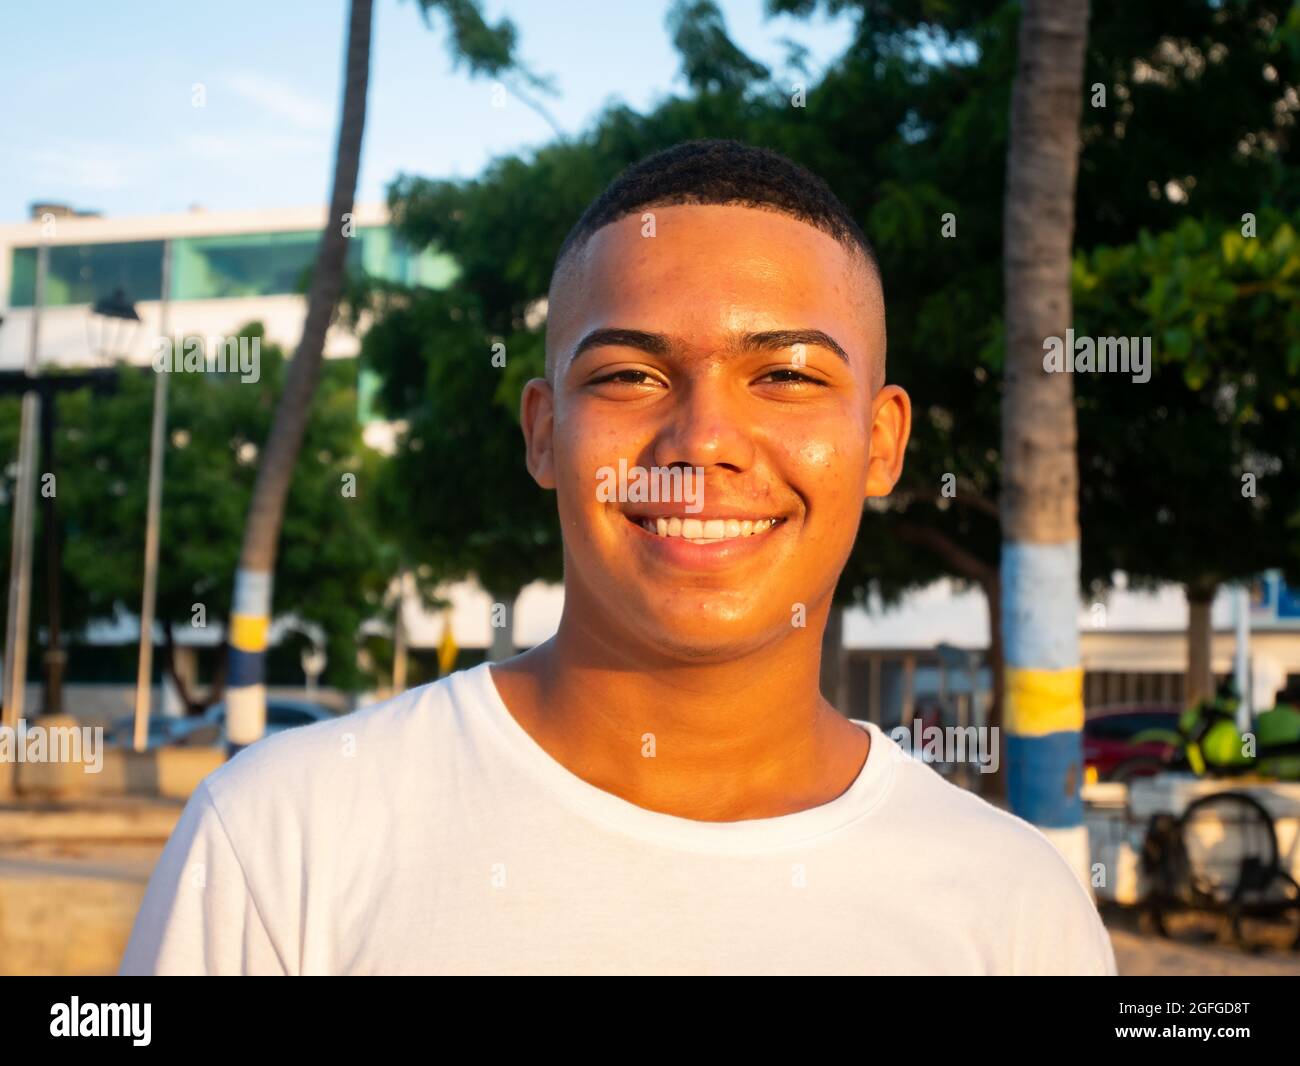 Riohacha, La Guajira, Colombia - May 26 2021: Portrait of a Young Latin Man Smiling at the Camera in the Public Park in the Sunset Stock Photo